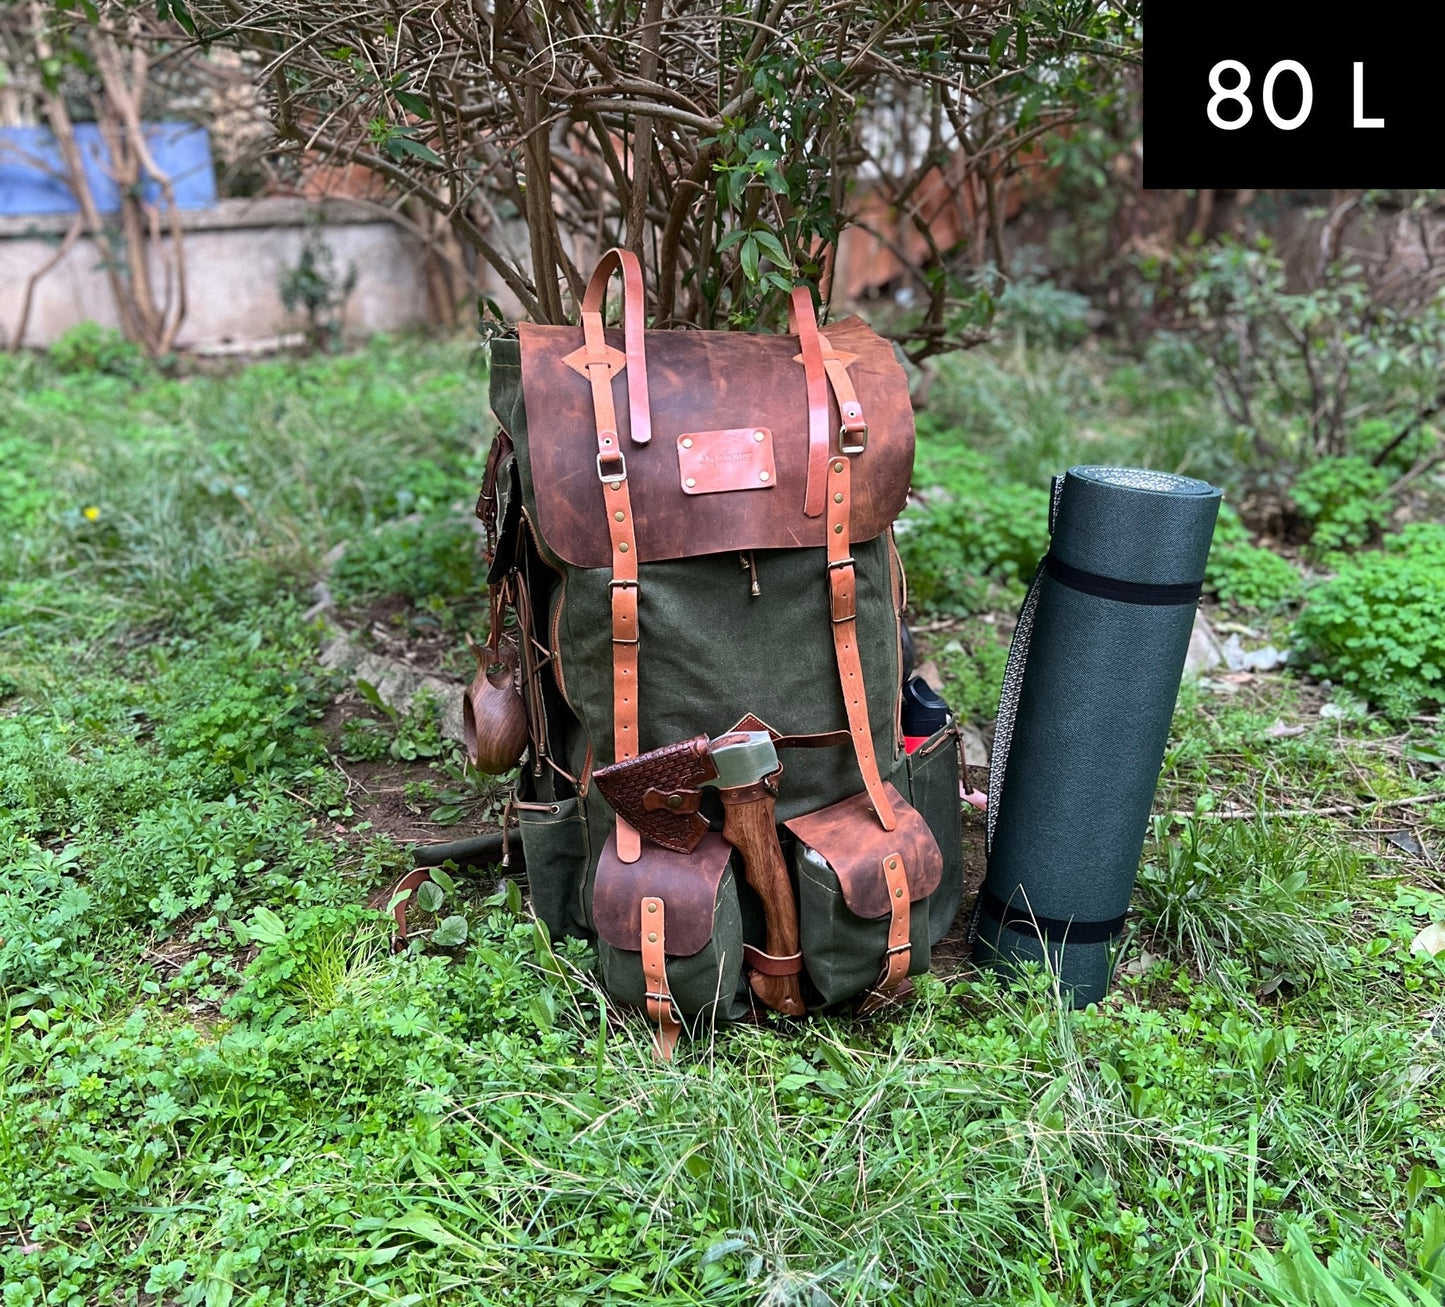 Camping Backpack | Camping Backpacks | 24 Hours Tested Backpack | 30 Liter to 50L Size Options | Brown, Green, Black, Black, White Colors bushcraft backpack - camping backpack - hiking backpack 99percenthandmade   